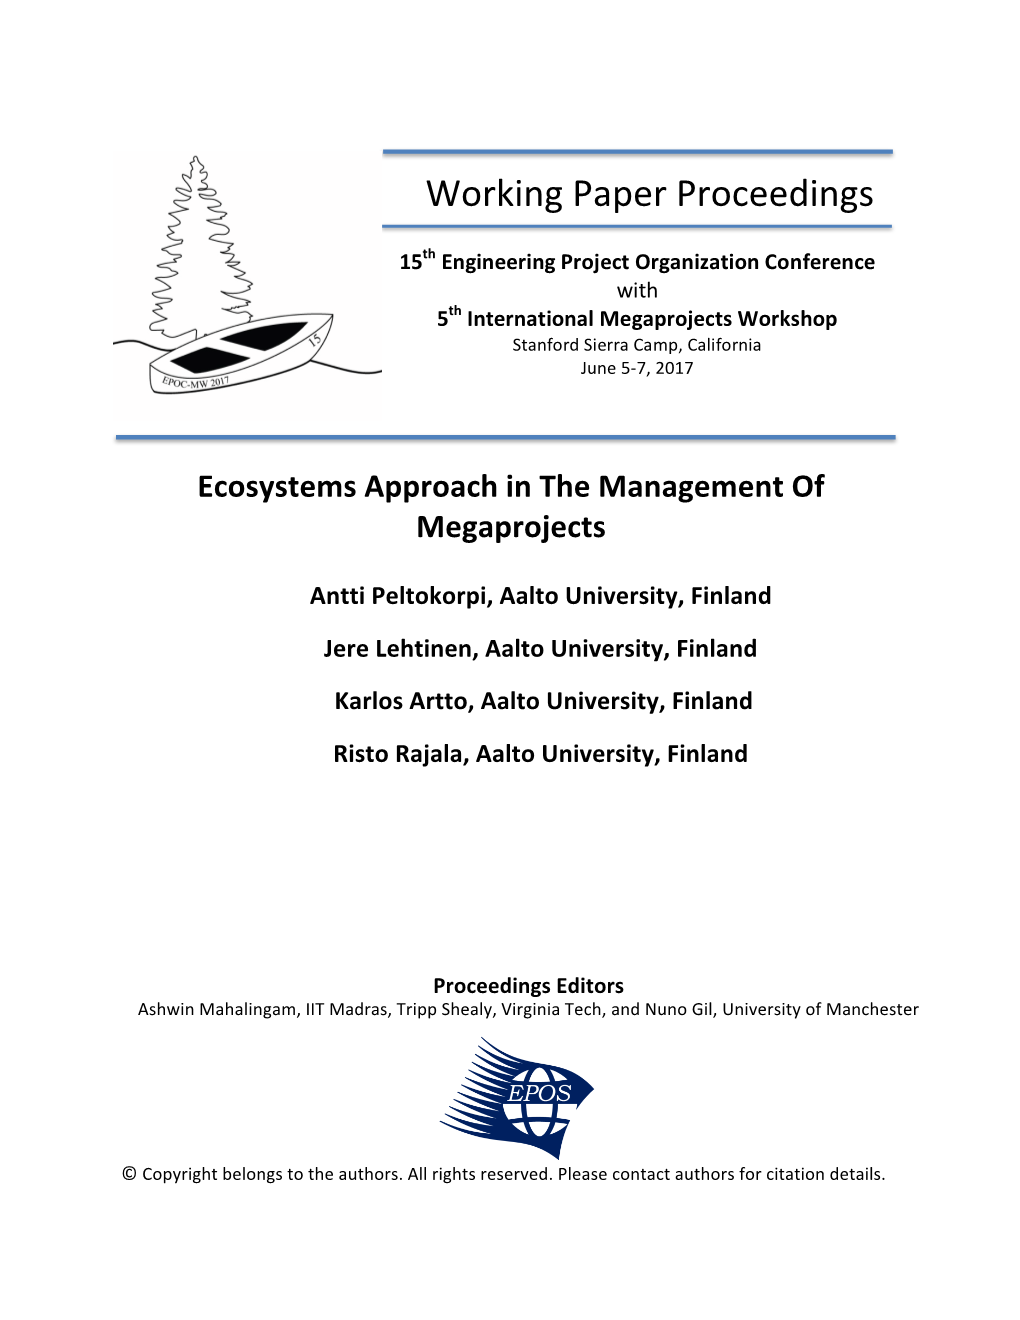 Ecosystems Approach in the Management of Megaprojects